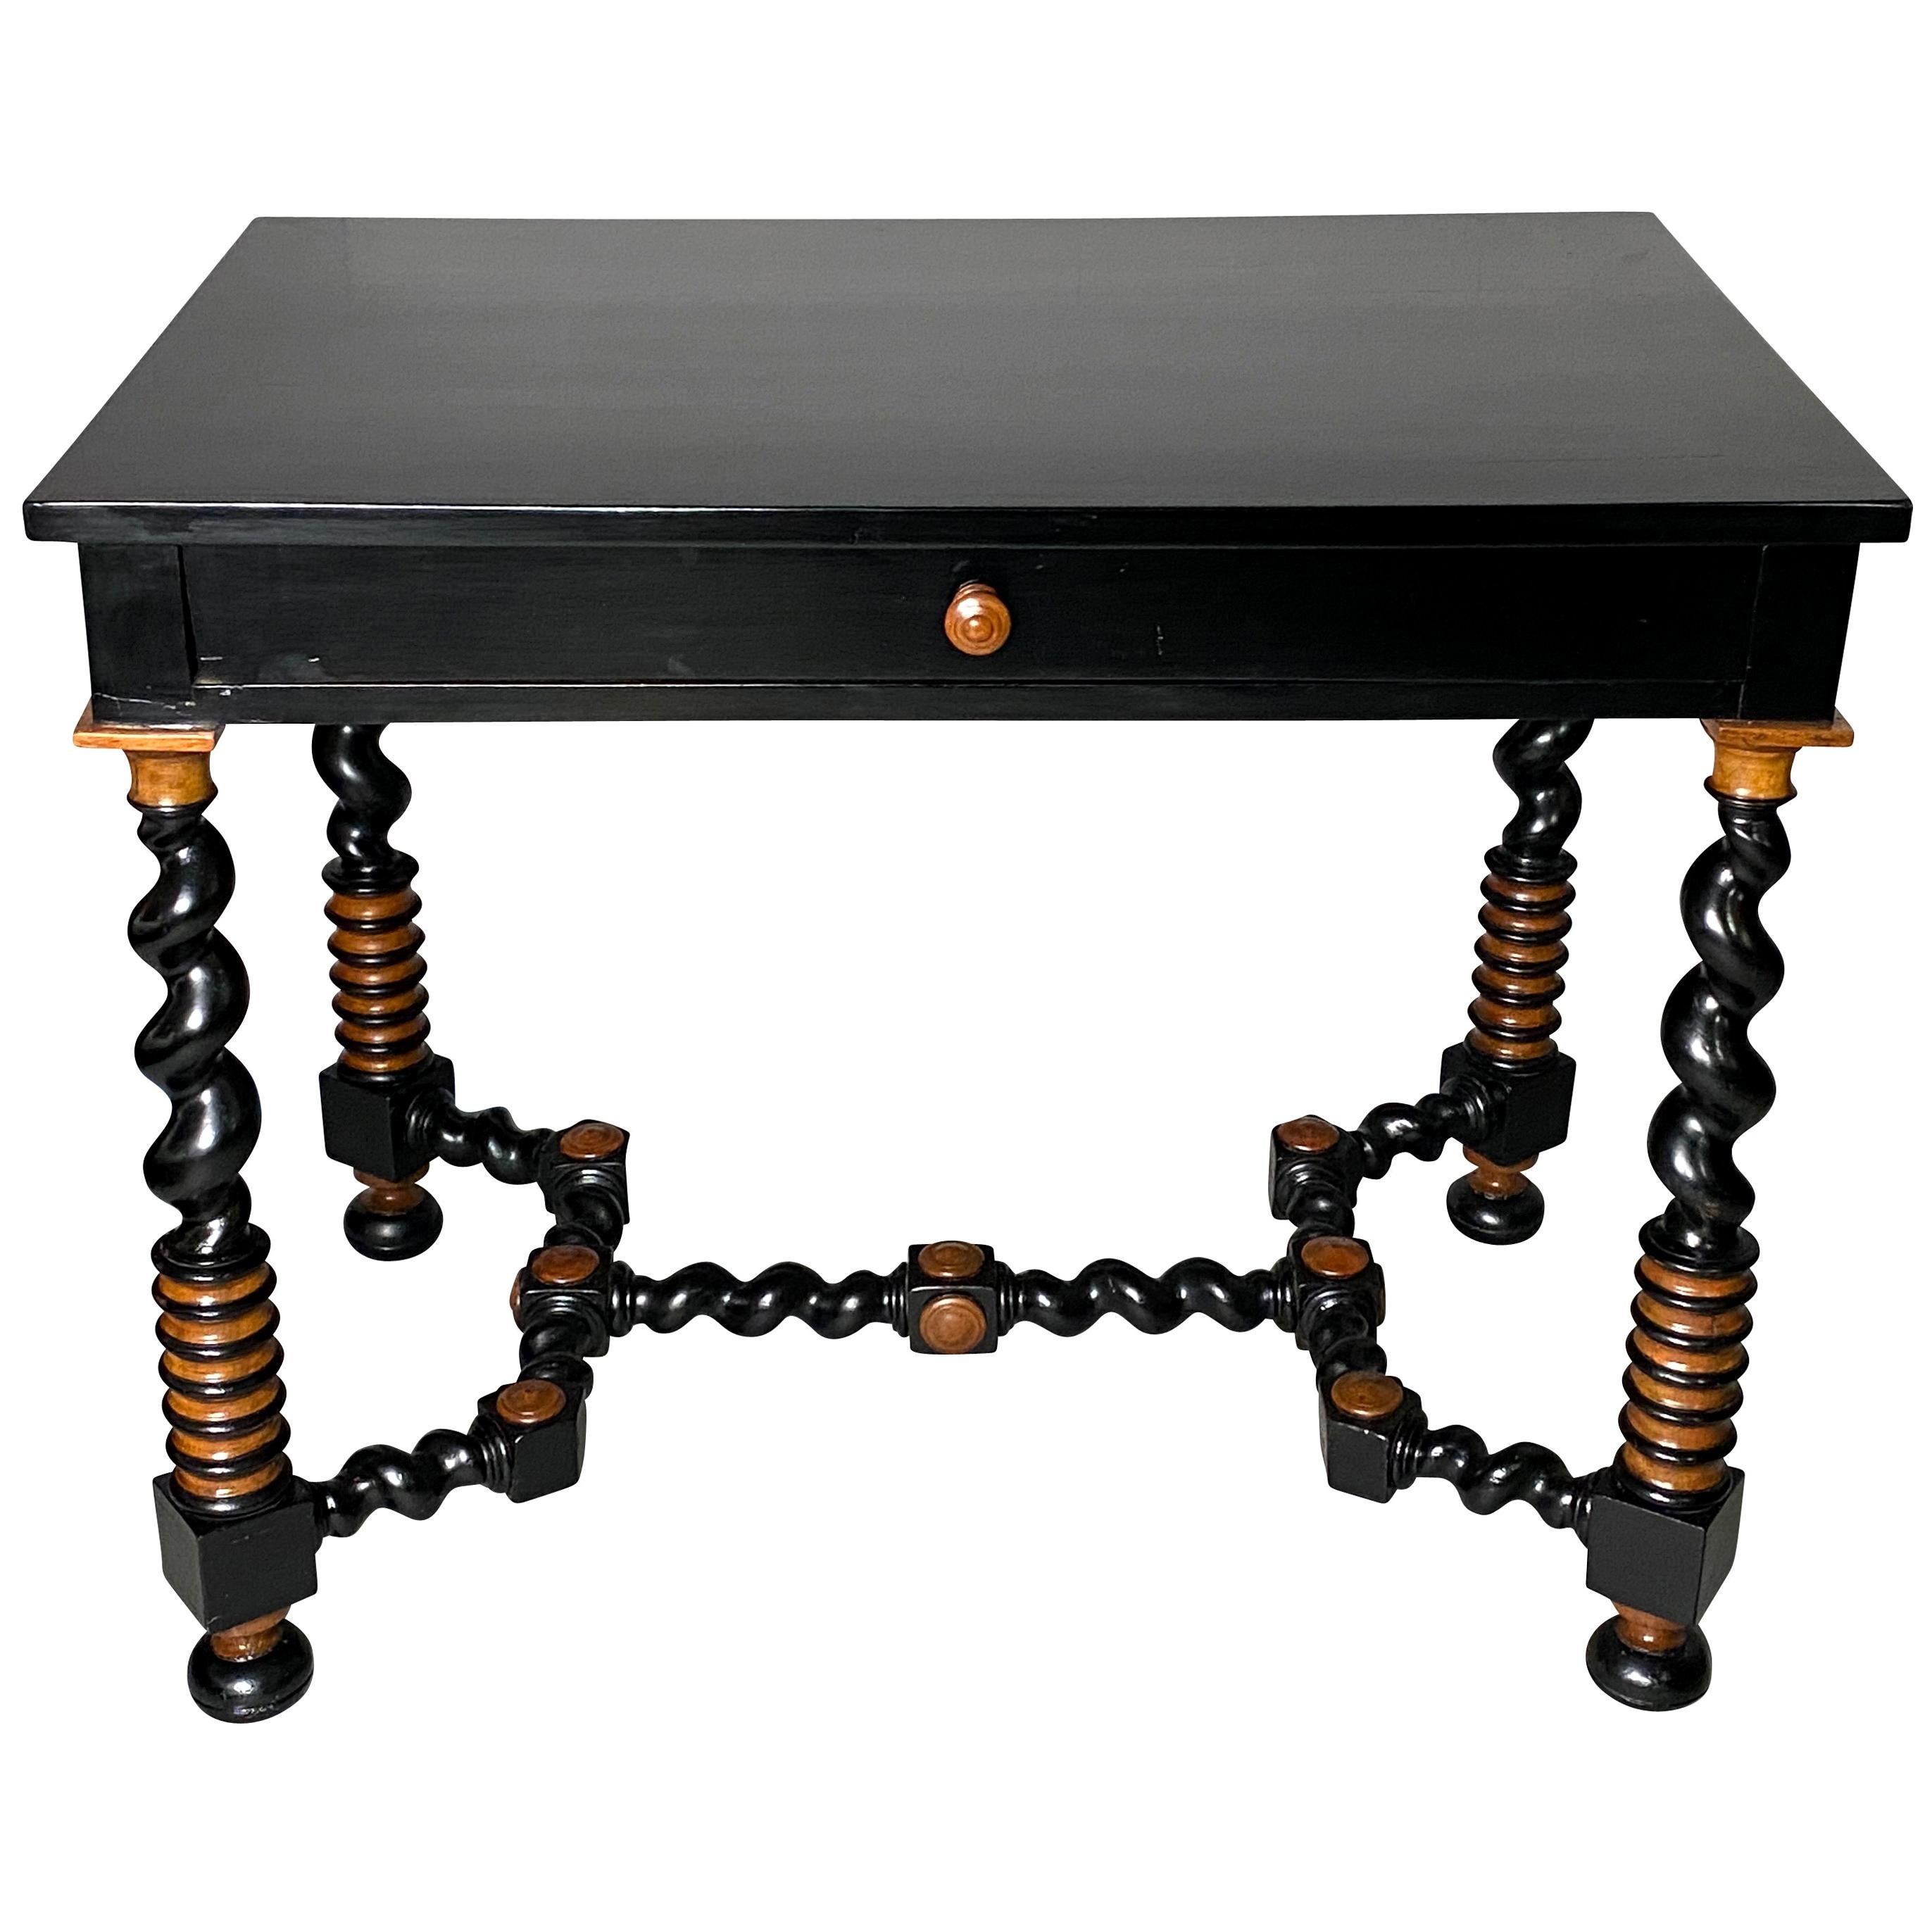 Victorian Ebonized and Fruitwood Table